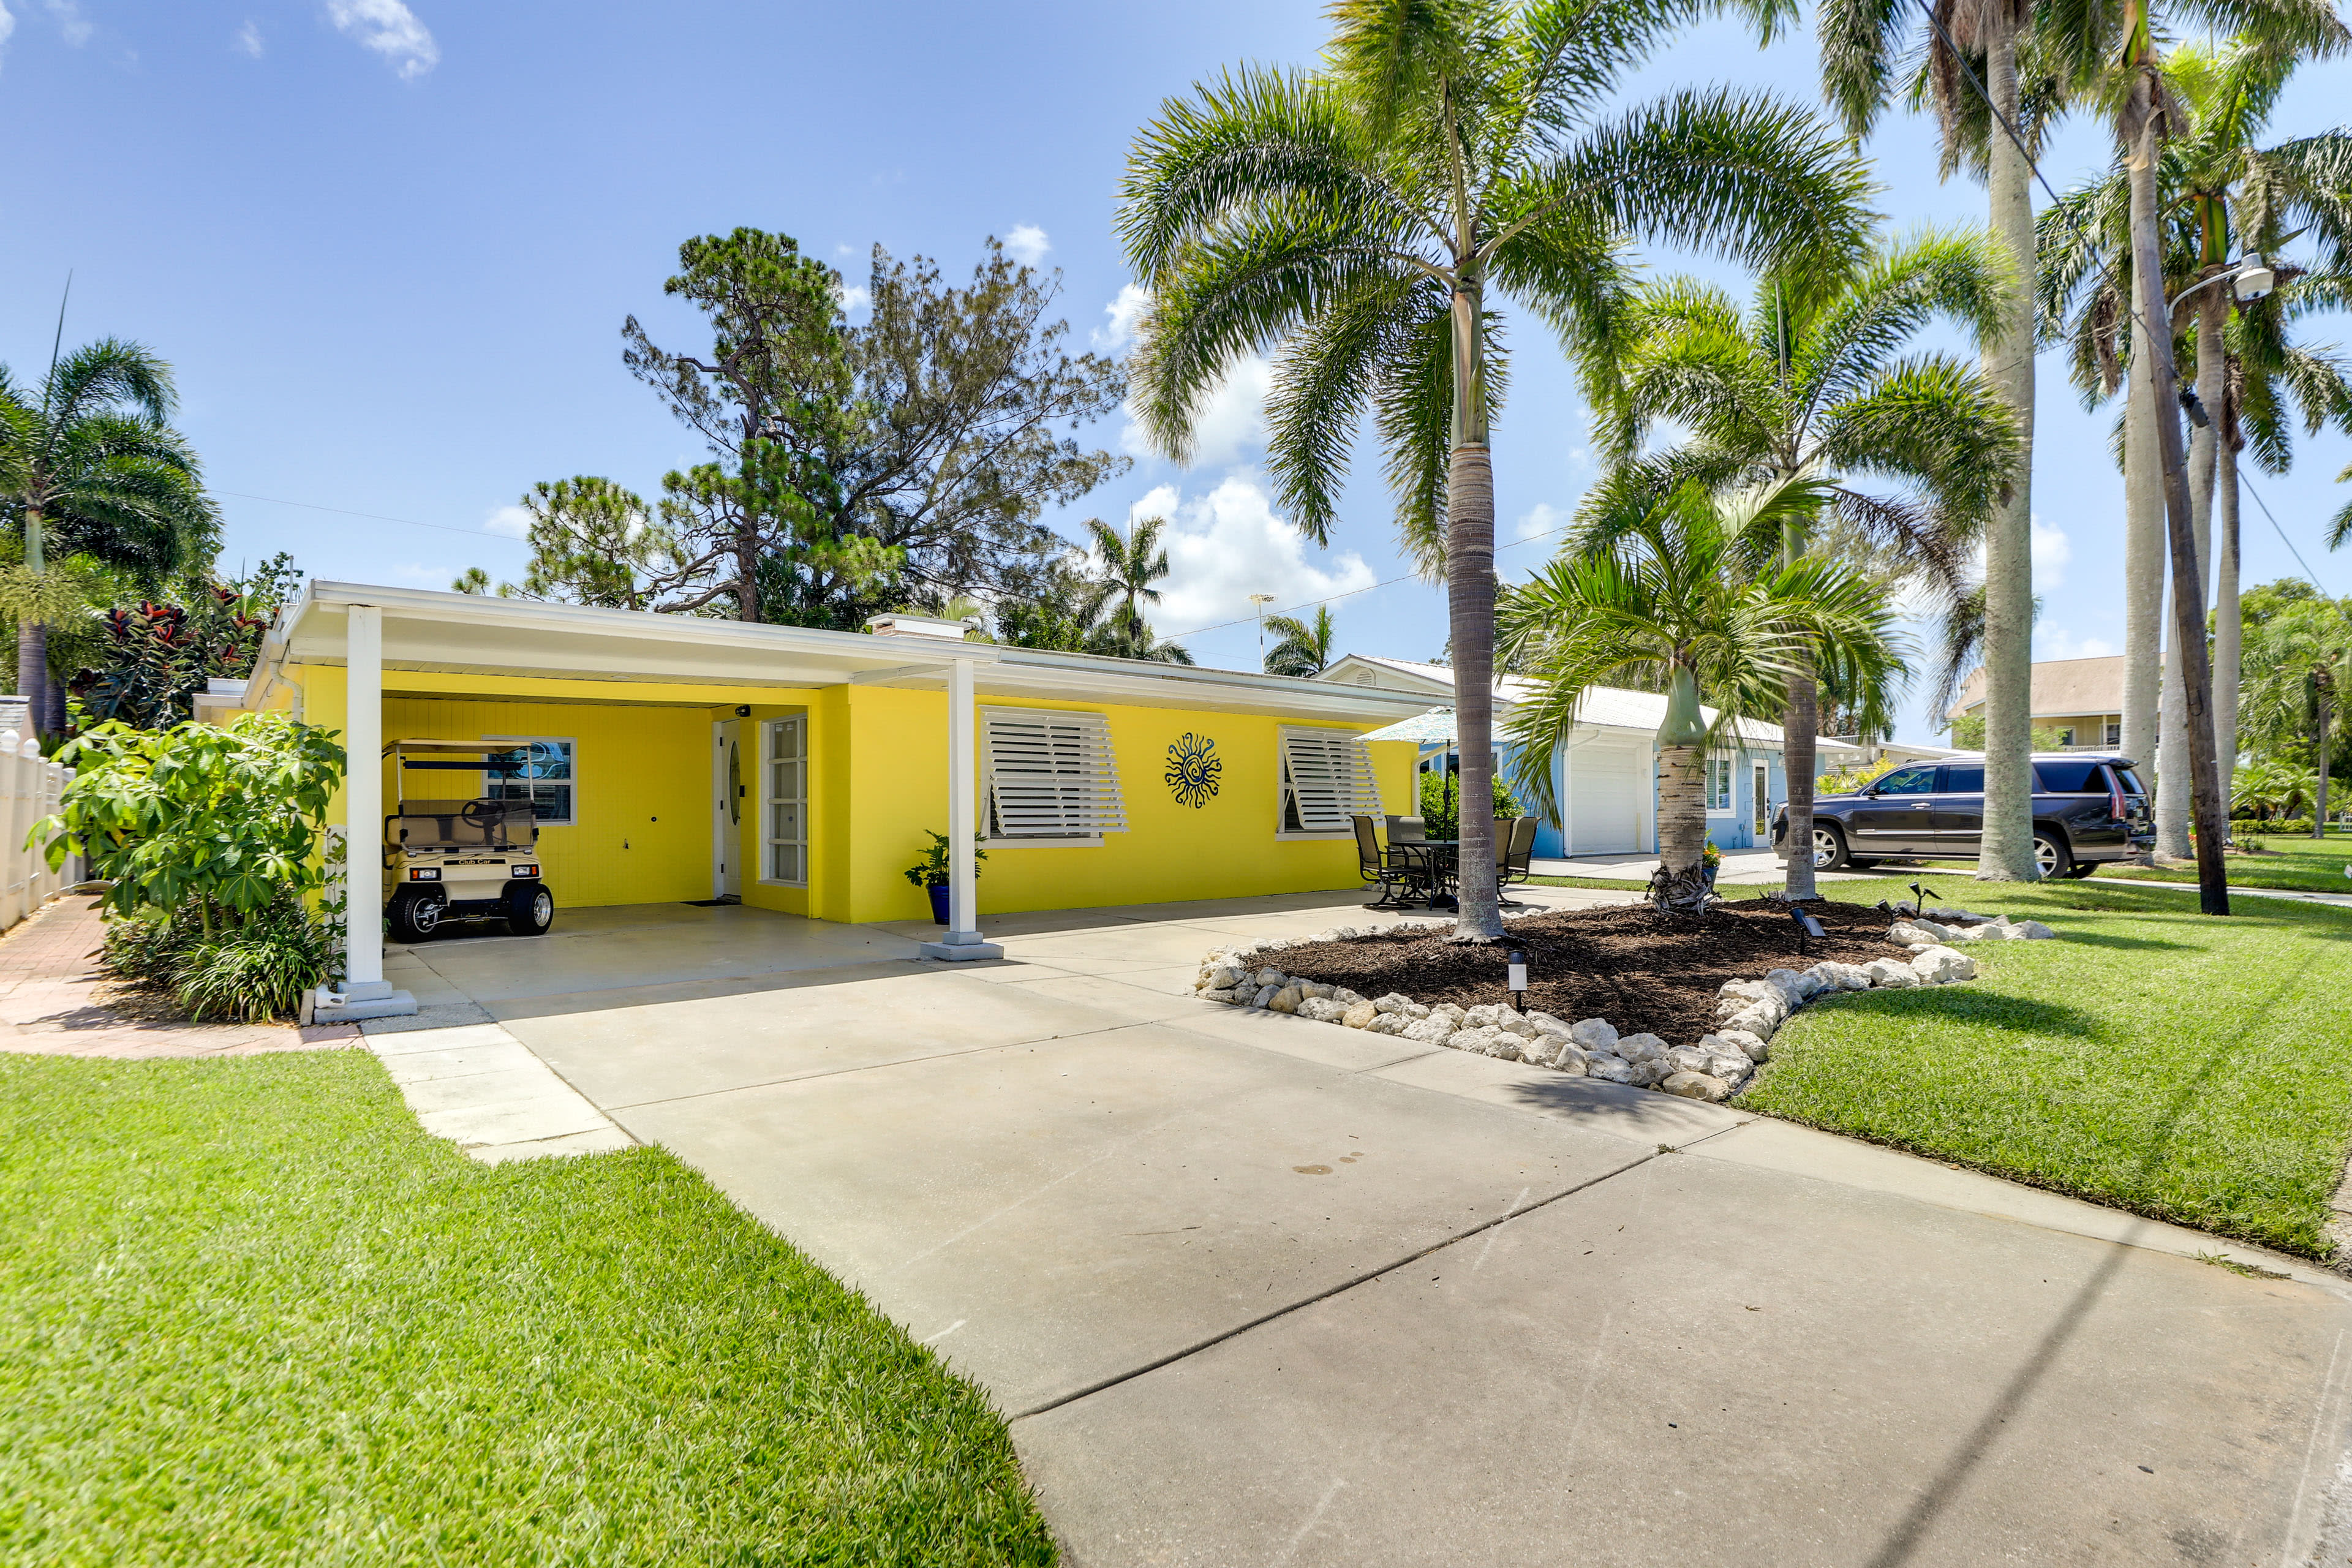 Bradenton Vacation Rental | 3BR | 2BA | 1,167 Sq Ft | Small Step for Entry